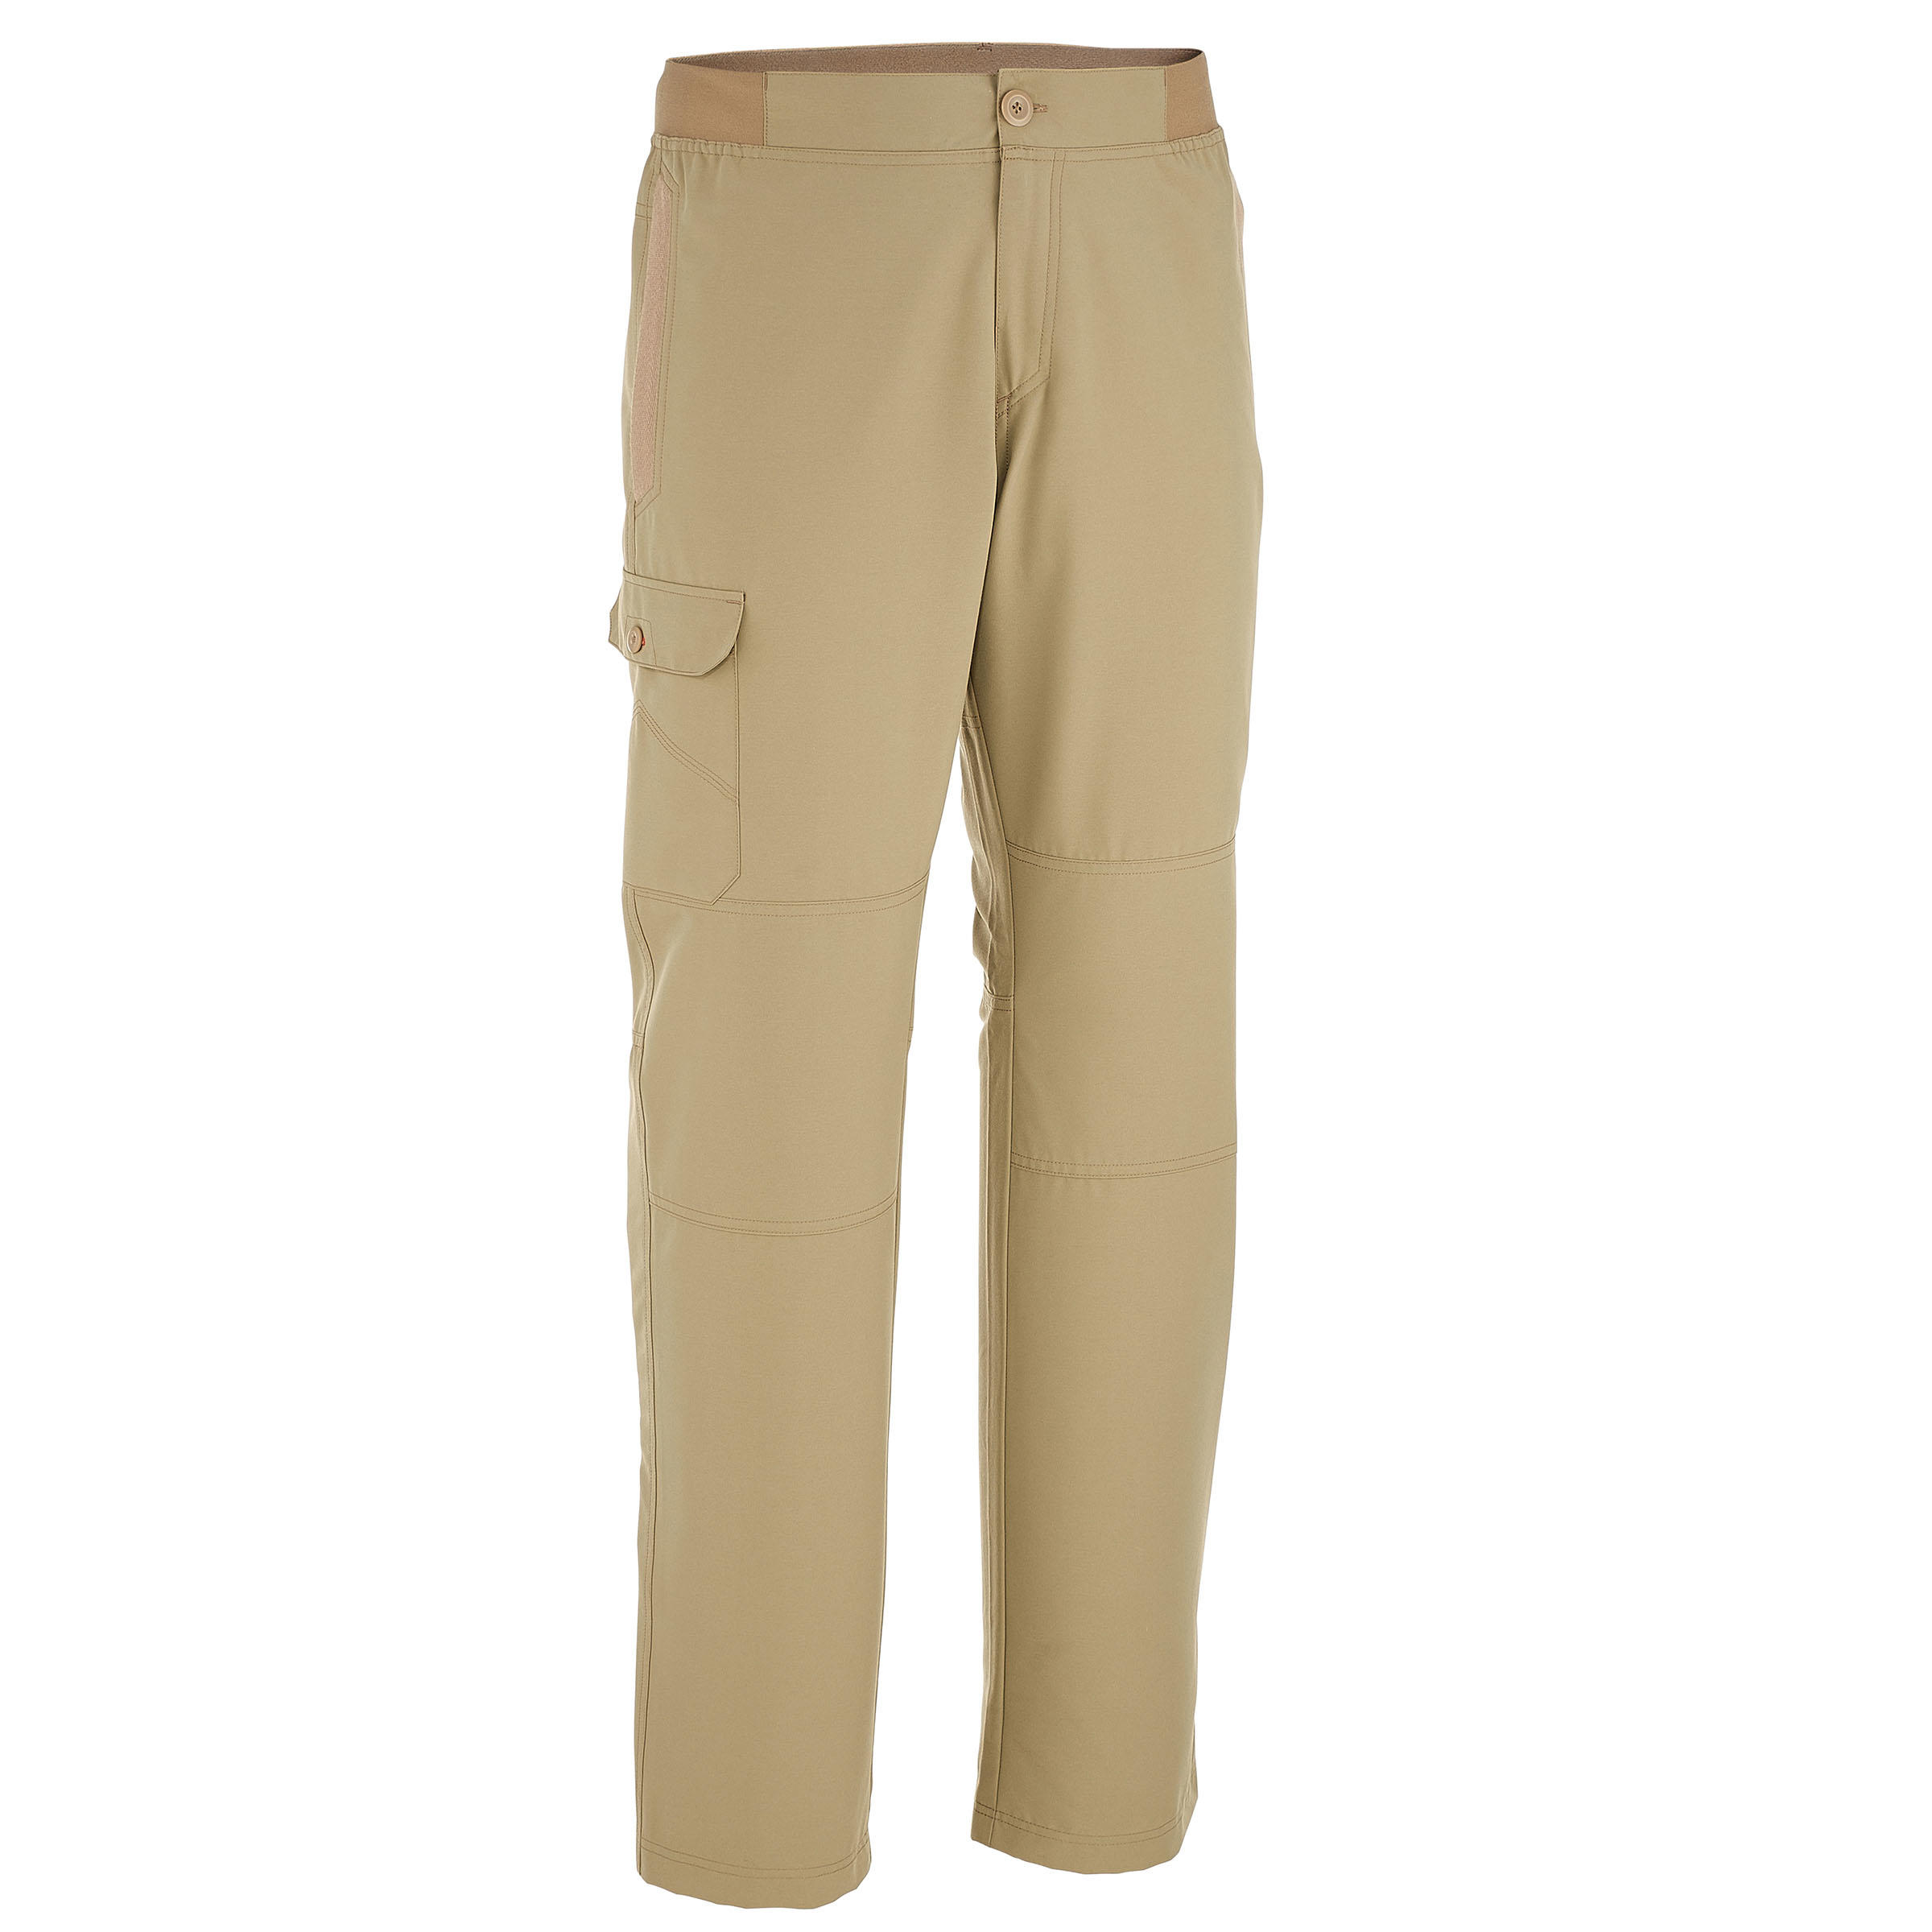 quechua trousers india